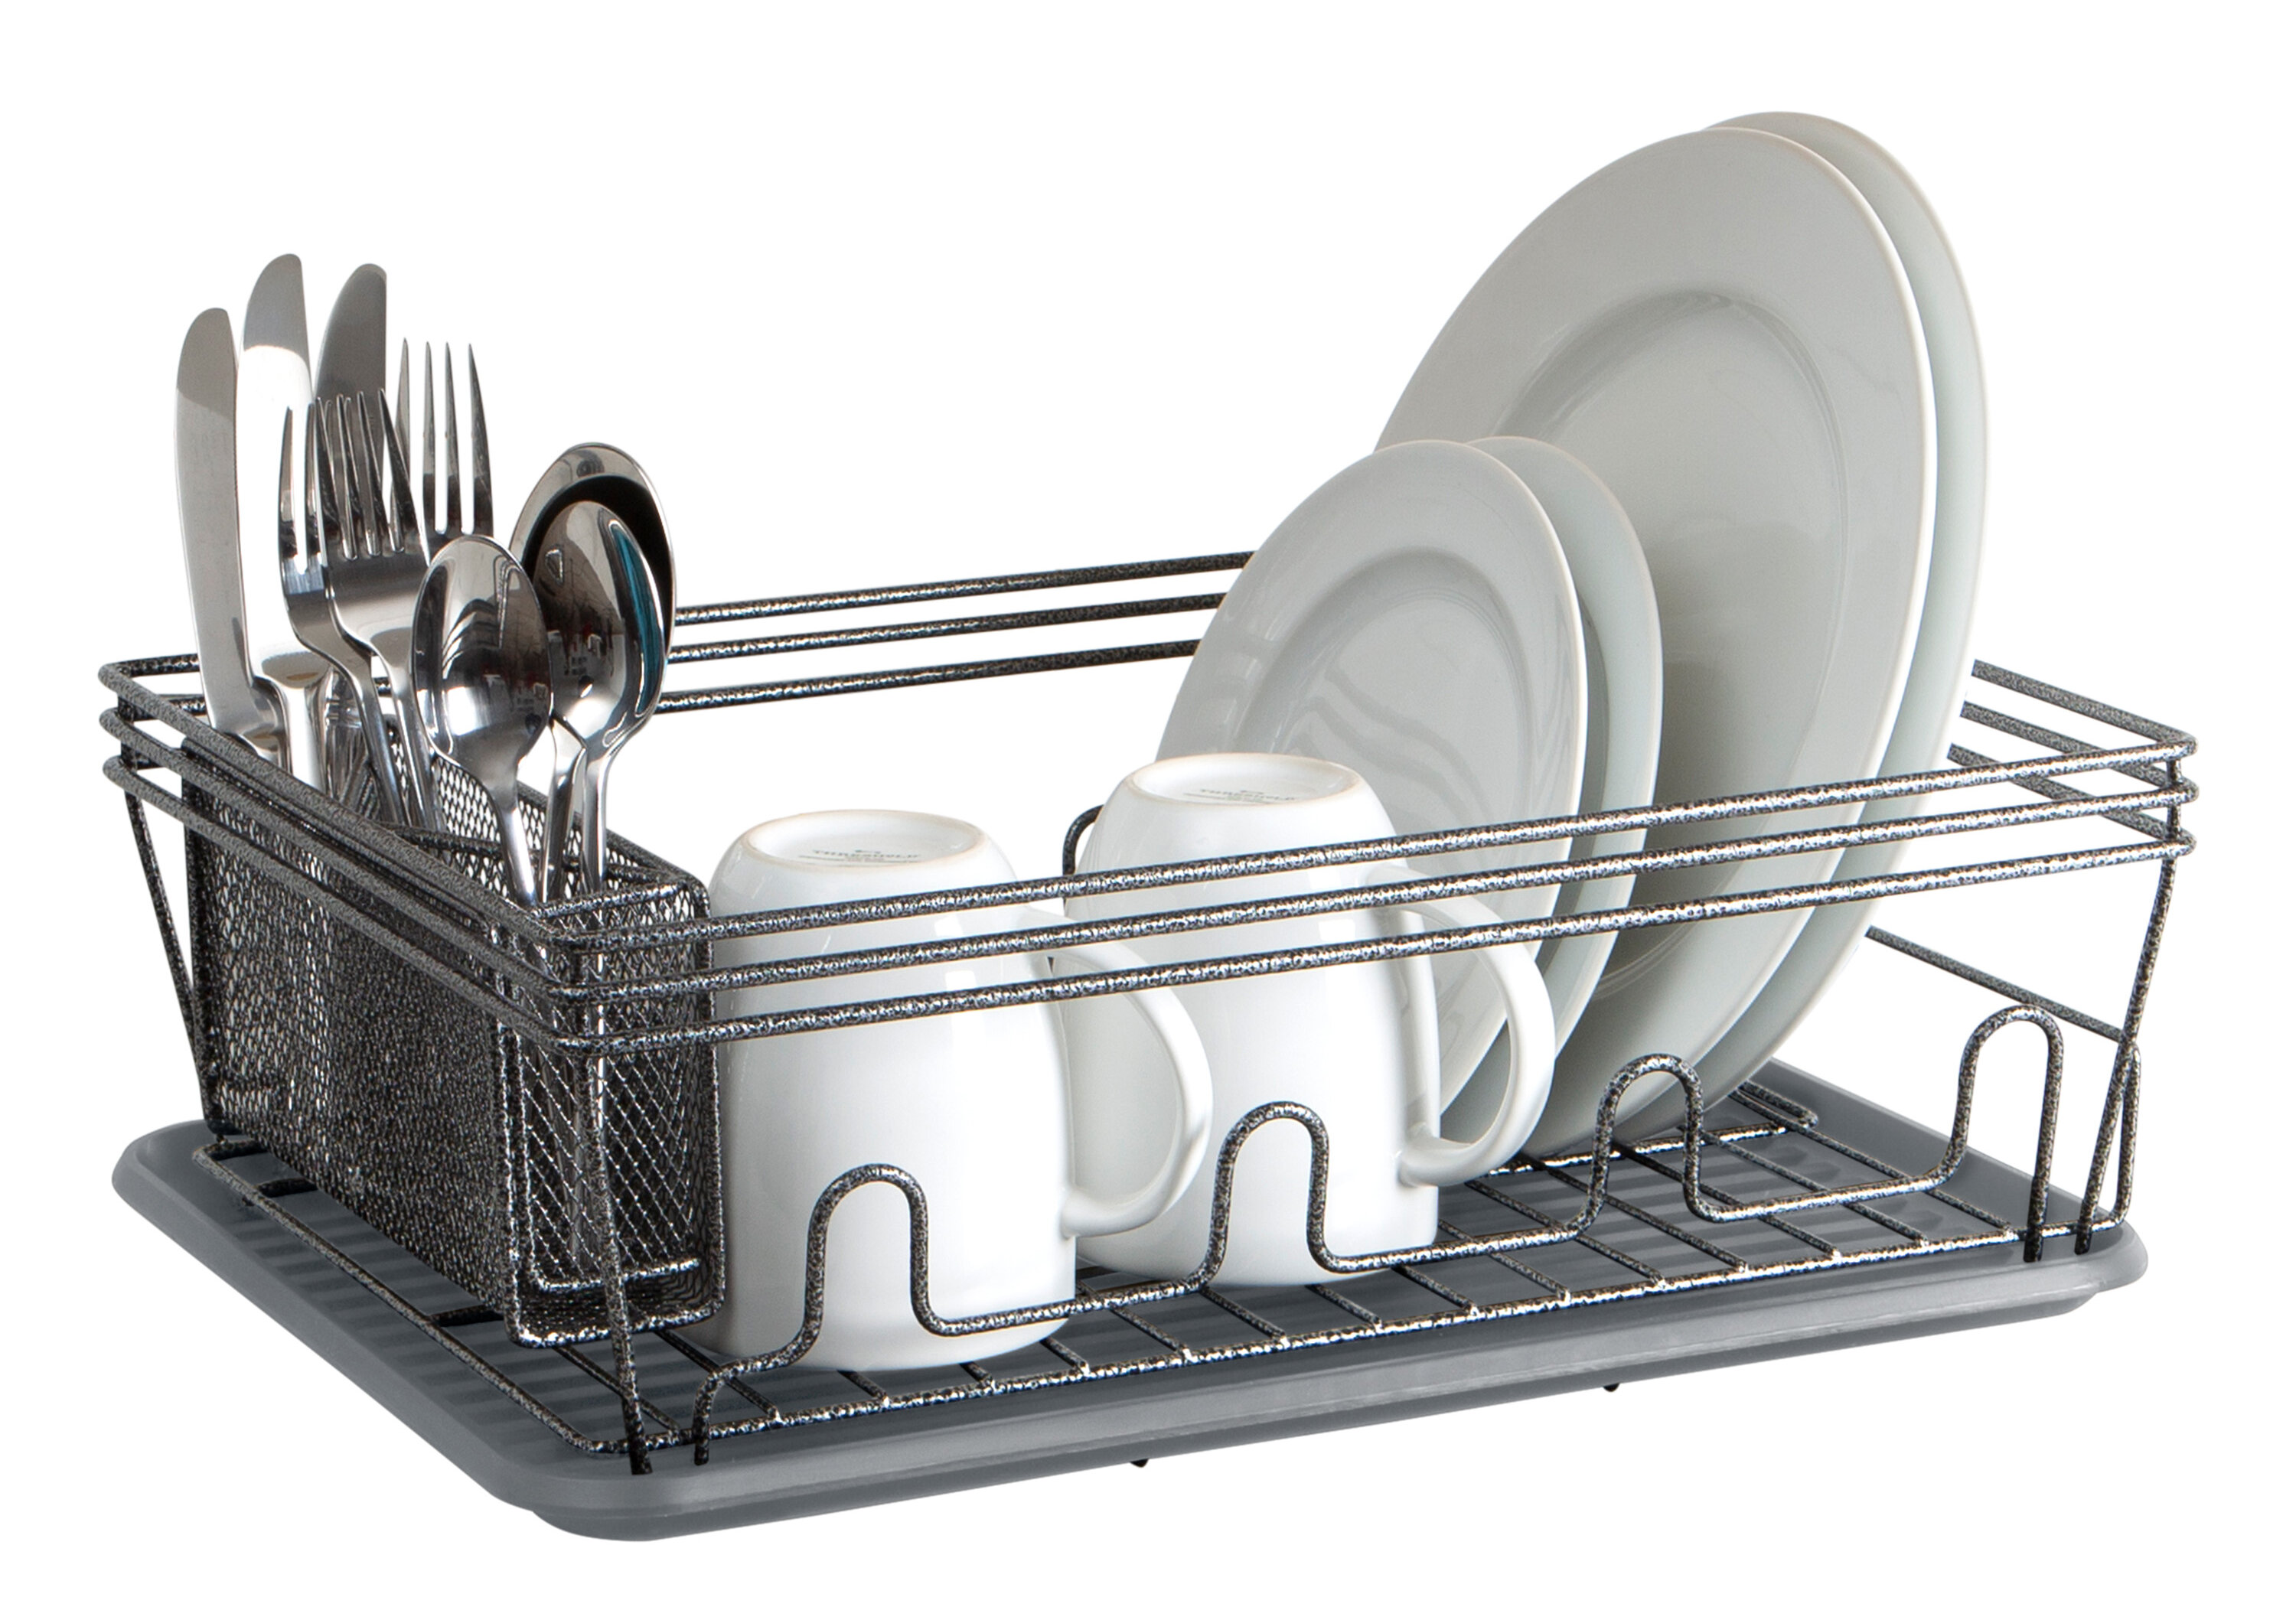 HBlife Aluminum Dish Drying Rack, Never Rust Sink Dish Drying Rack with Utensil Holder, Removable Plastic Drainer Tray with Adjustable Swivel Spout (